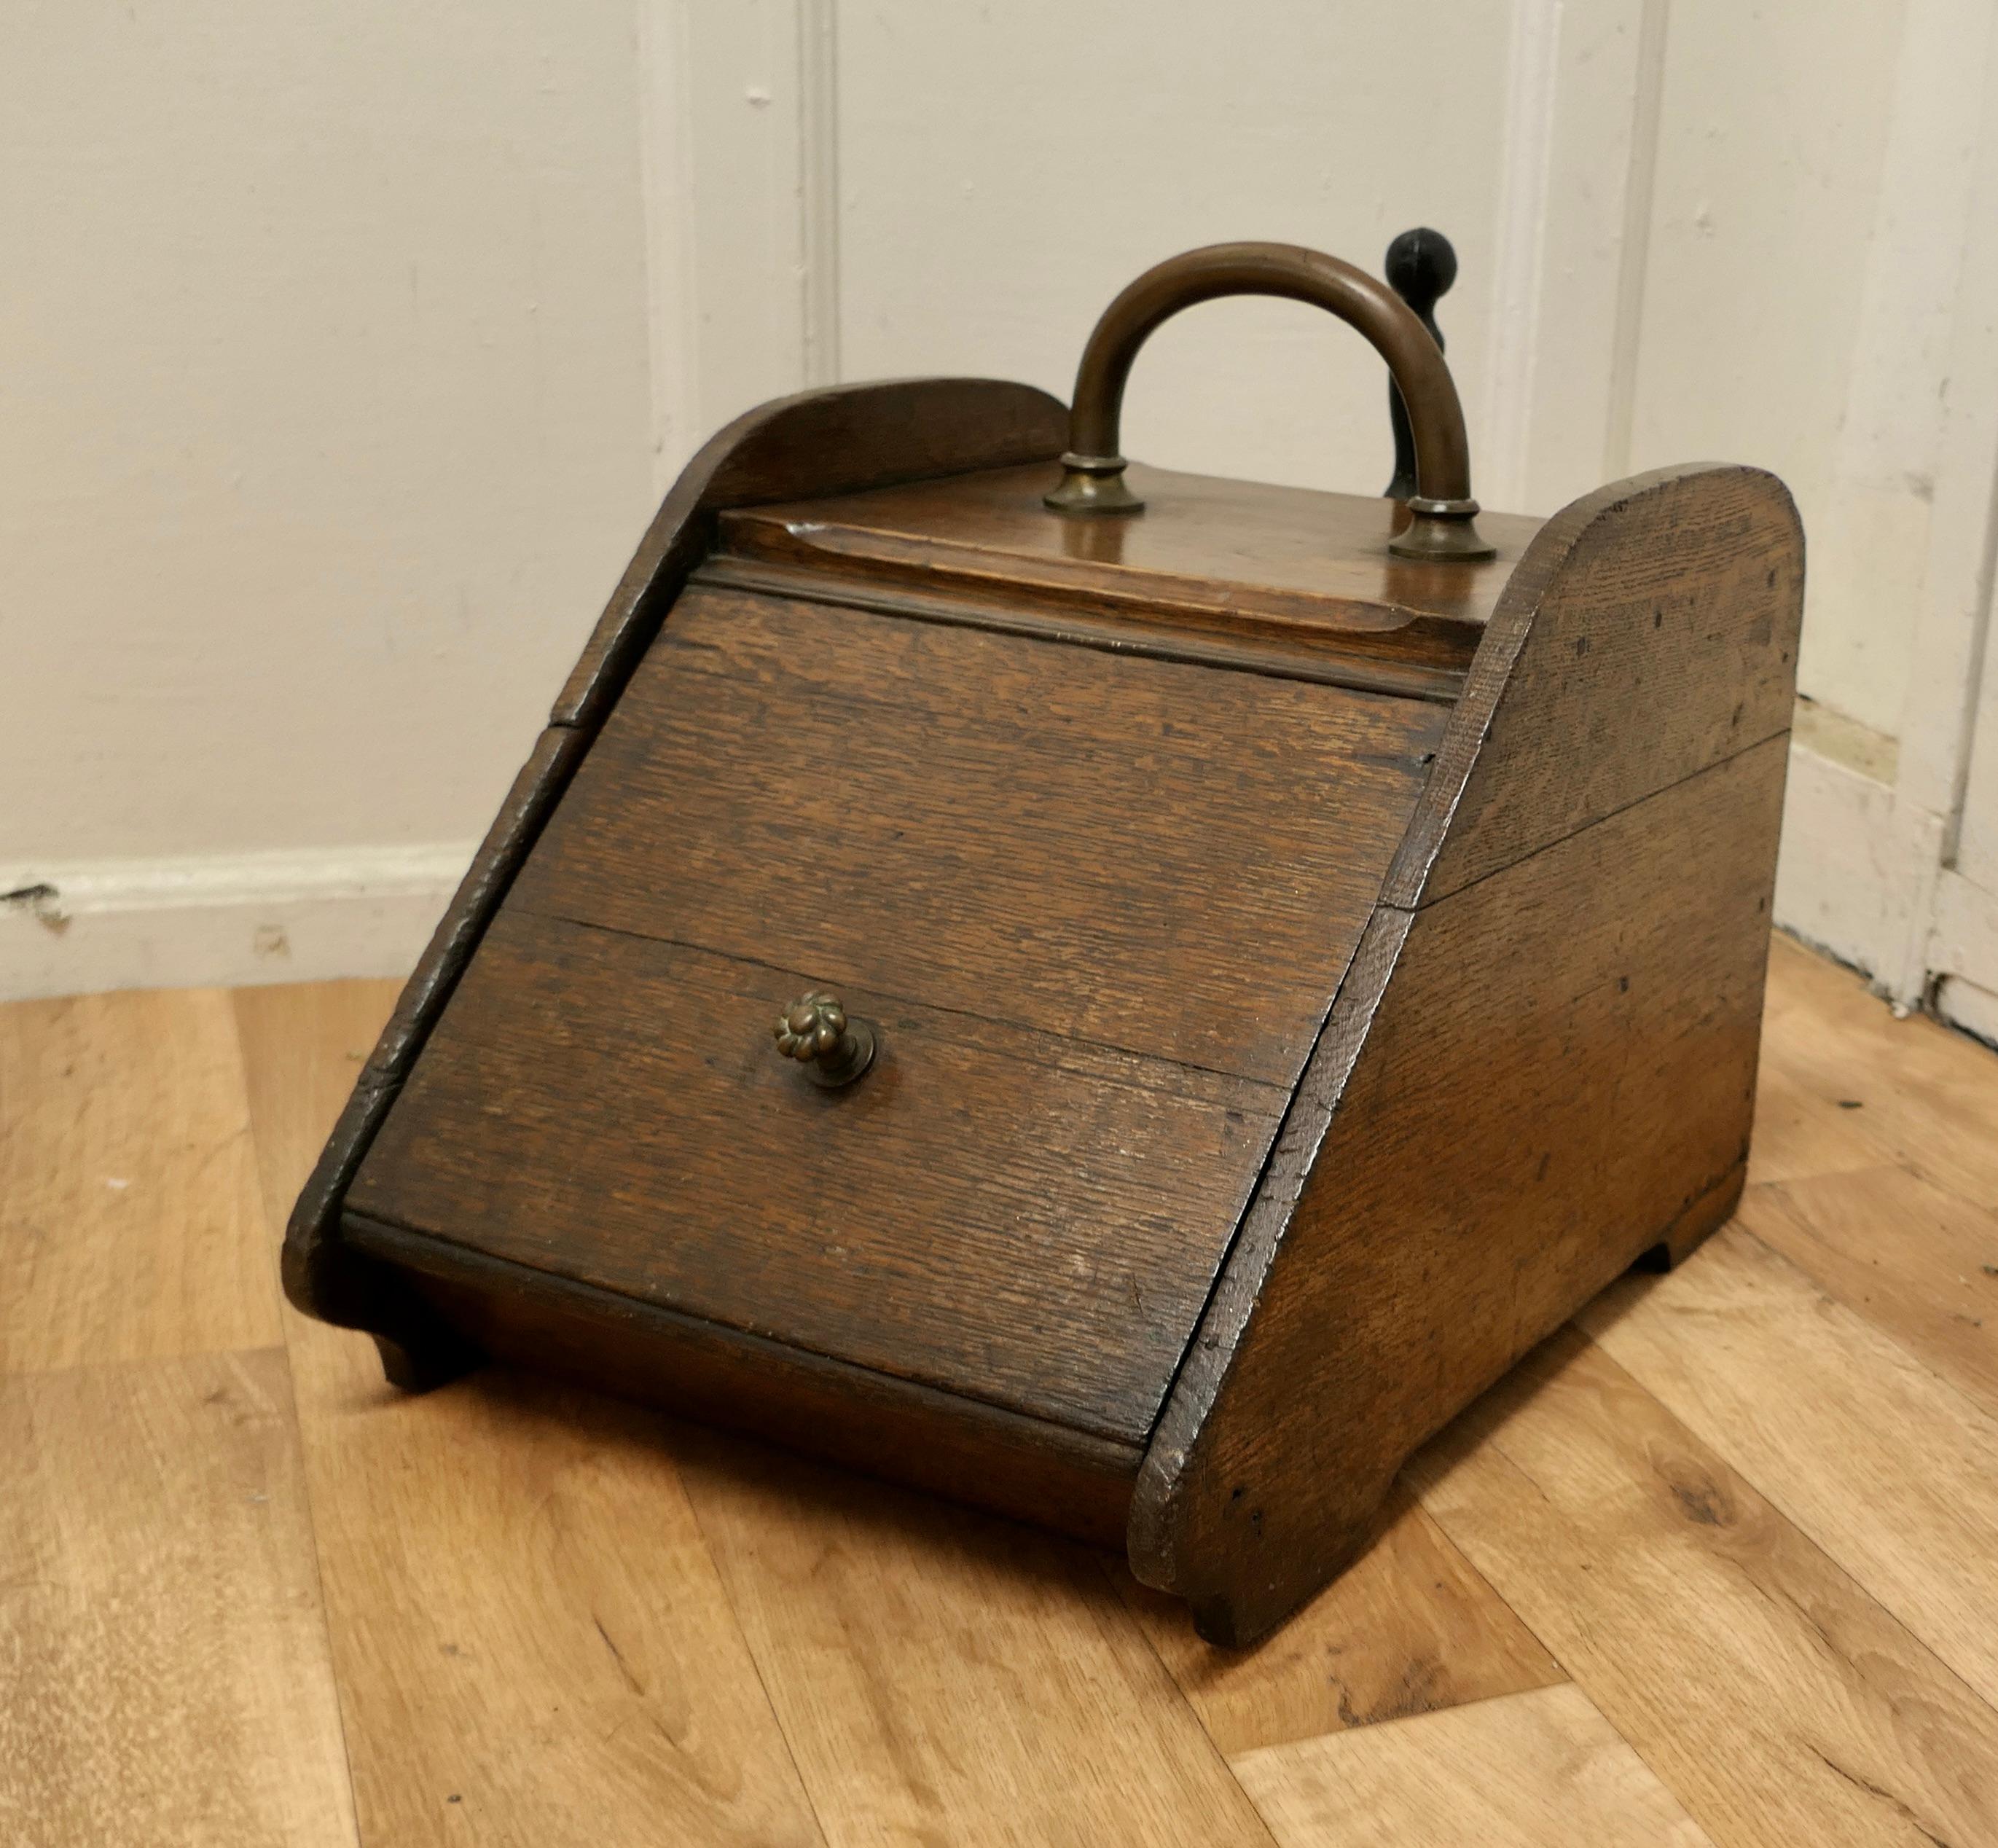 Chunky Victorian oak coal box with liner and shovel.

A charming piece of useful Victorian furniture.
The Purdonium has sloping front, hidden at the back a shovel in the shovel holder and inside a metal liner.
The box is made in solid oak and it